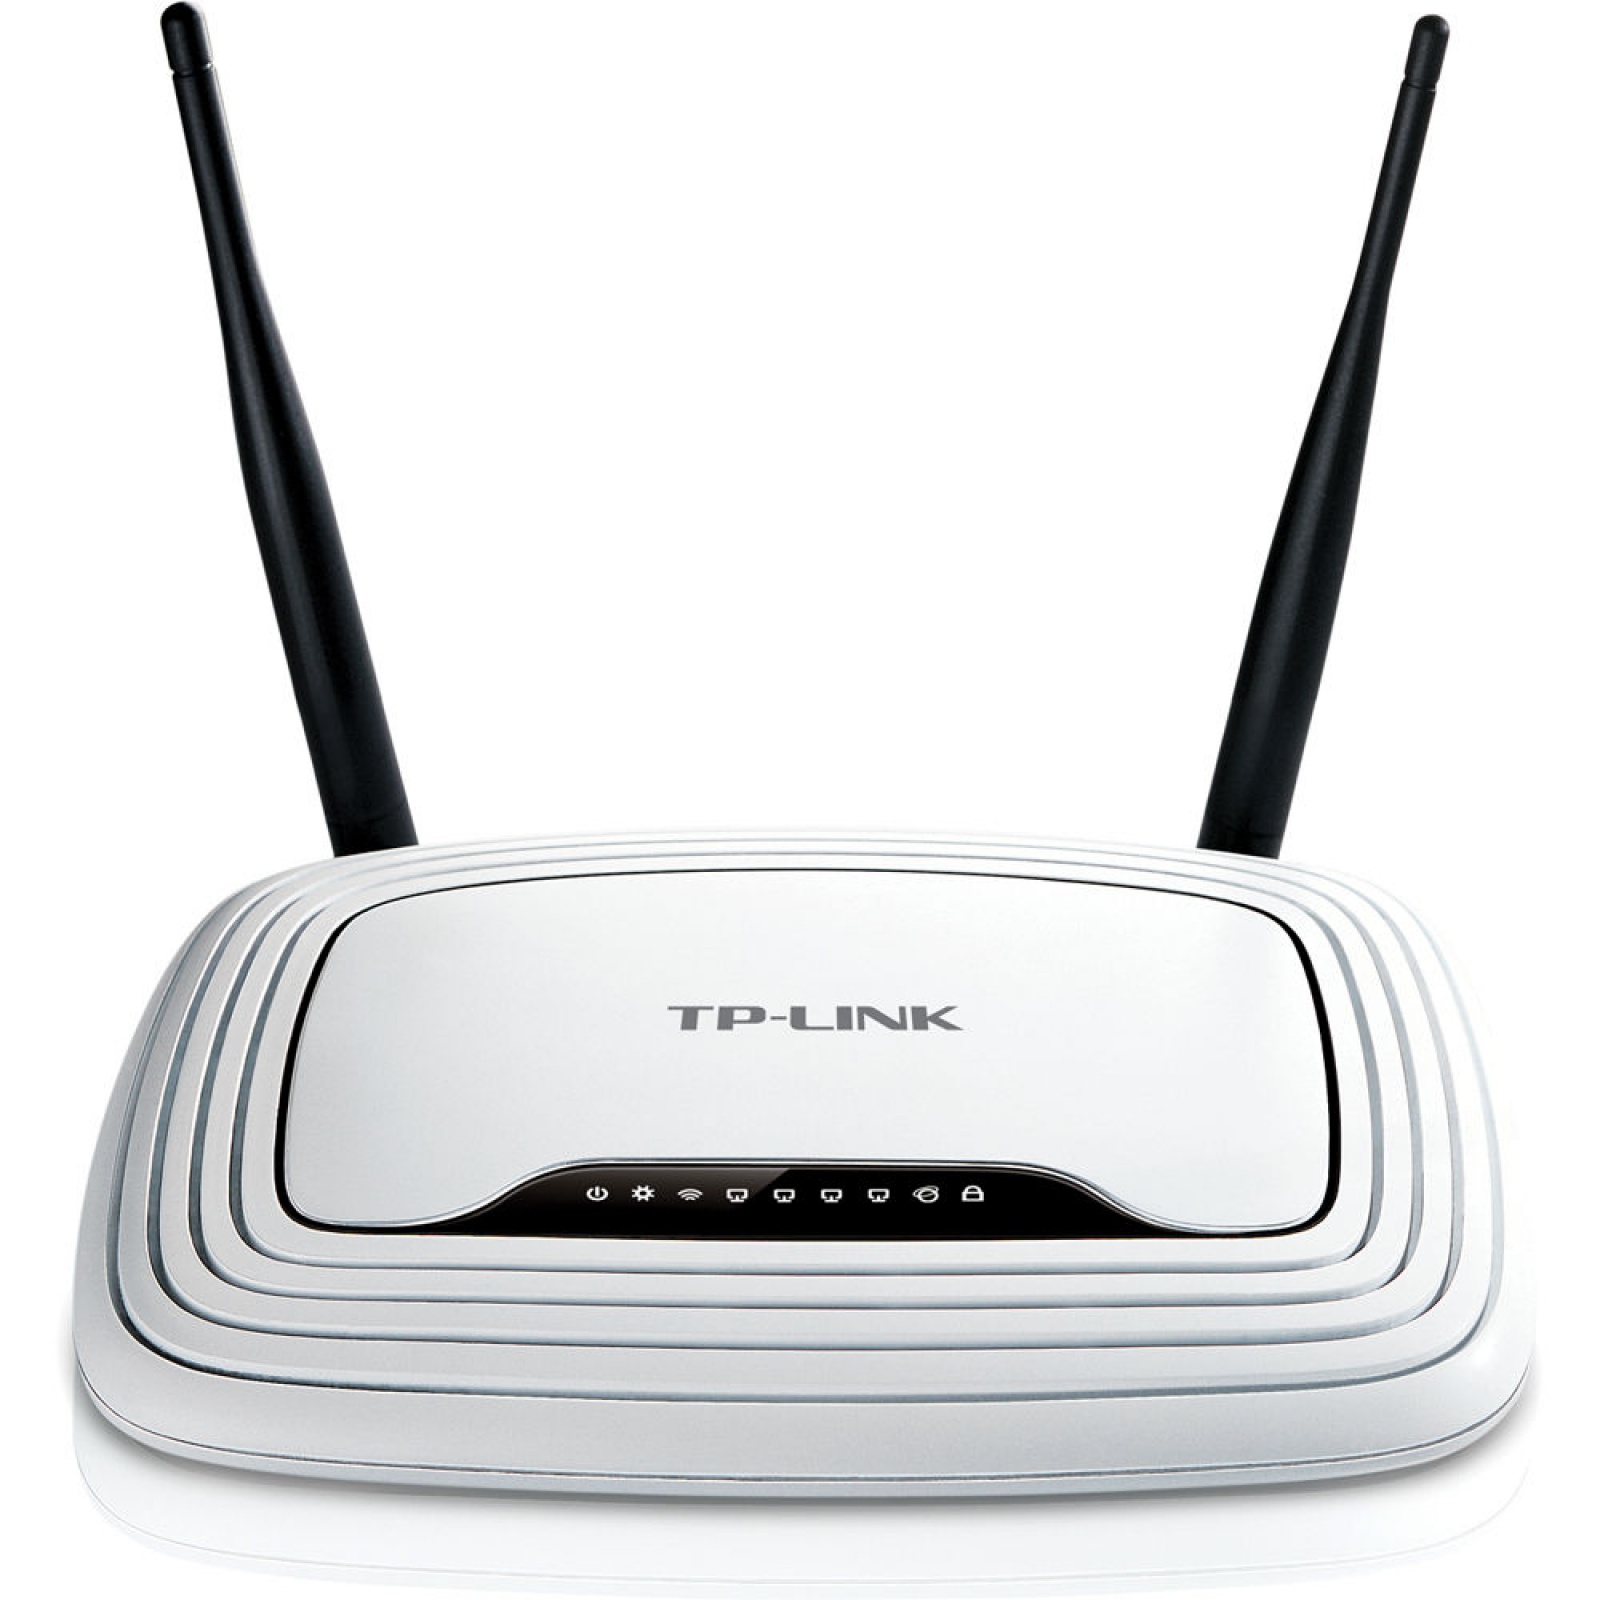 TP-LINK TLWR841N Wireless Cable Router